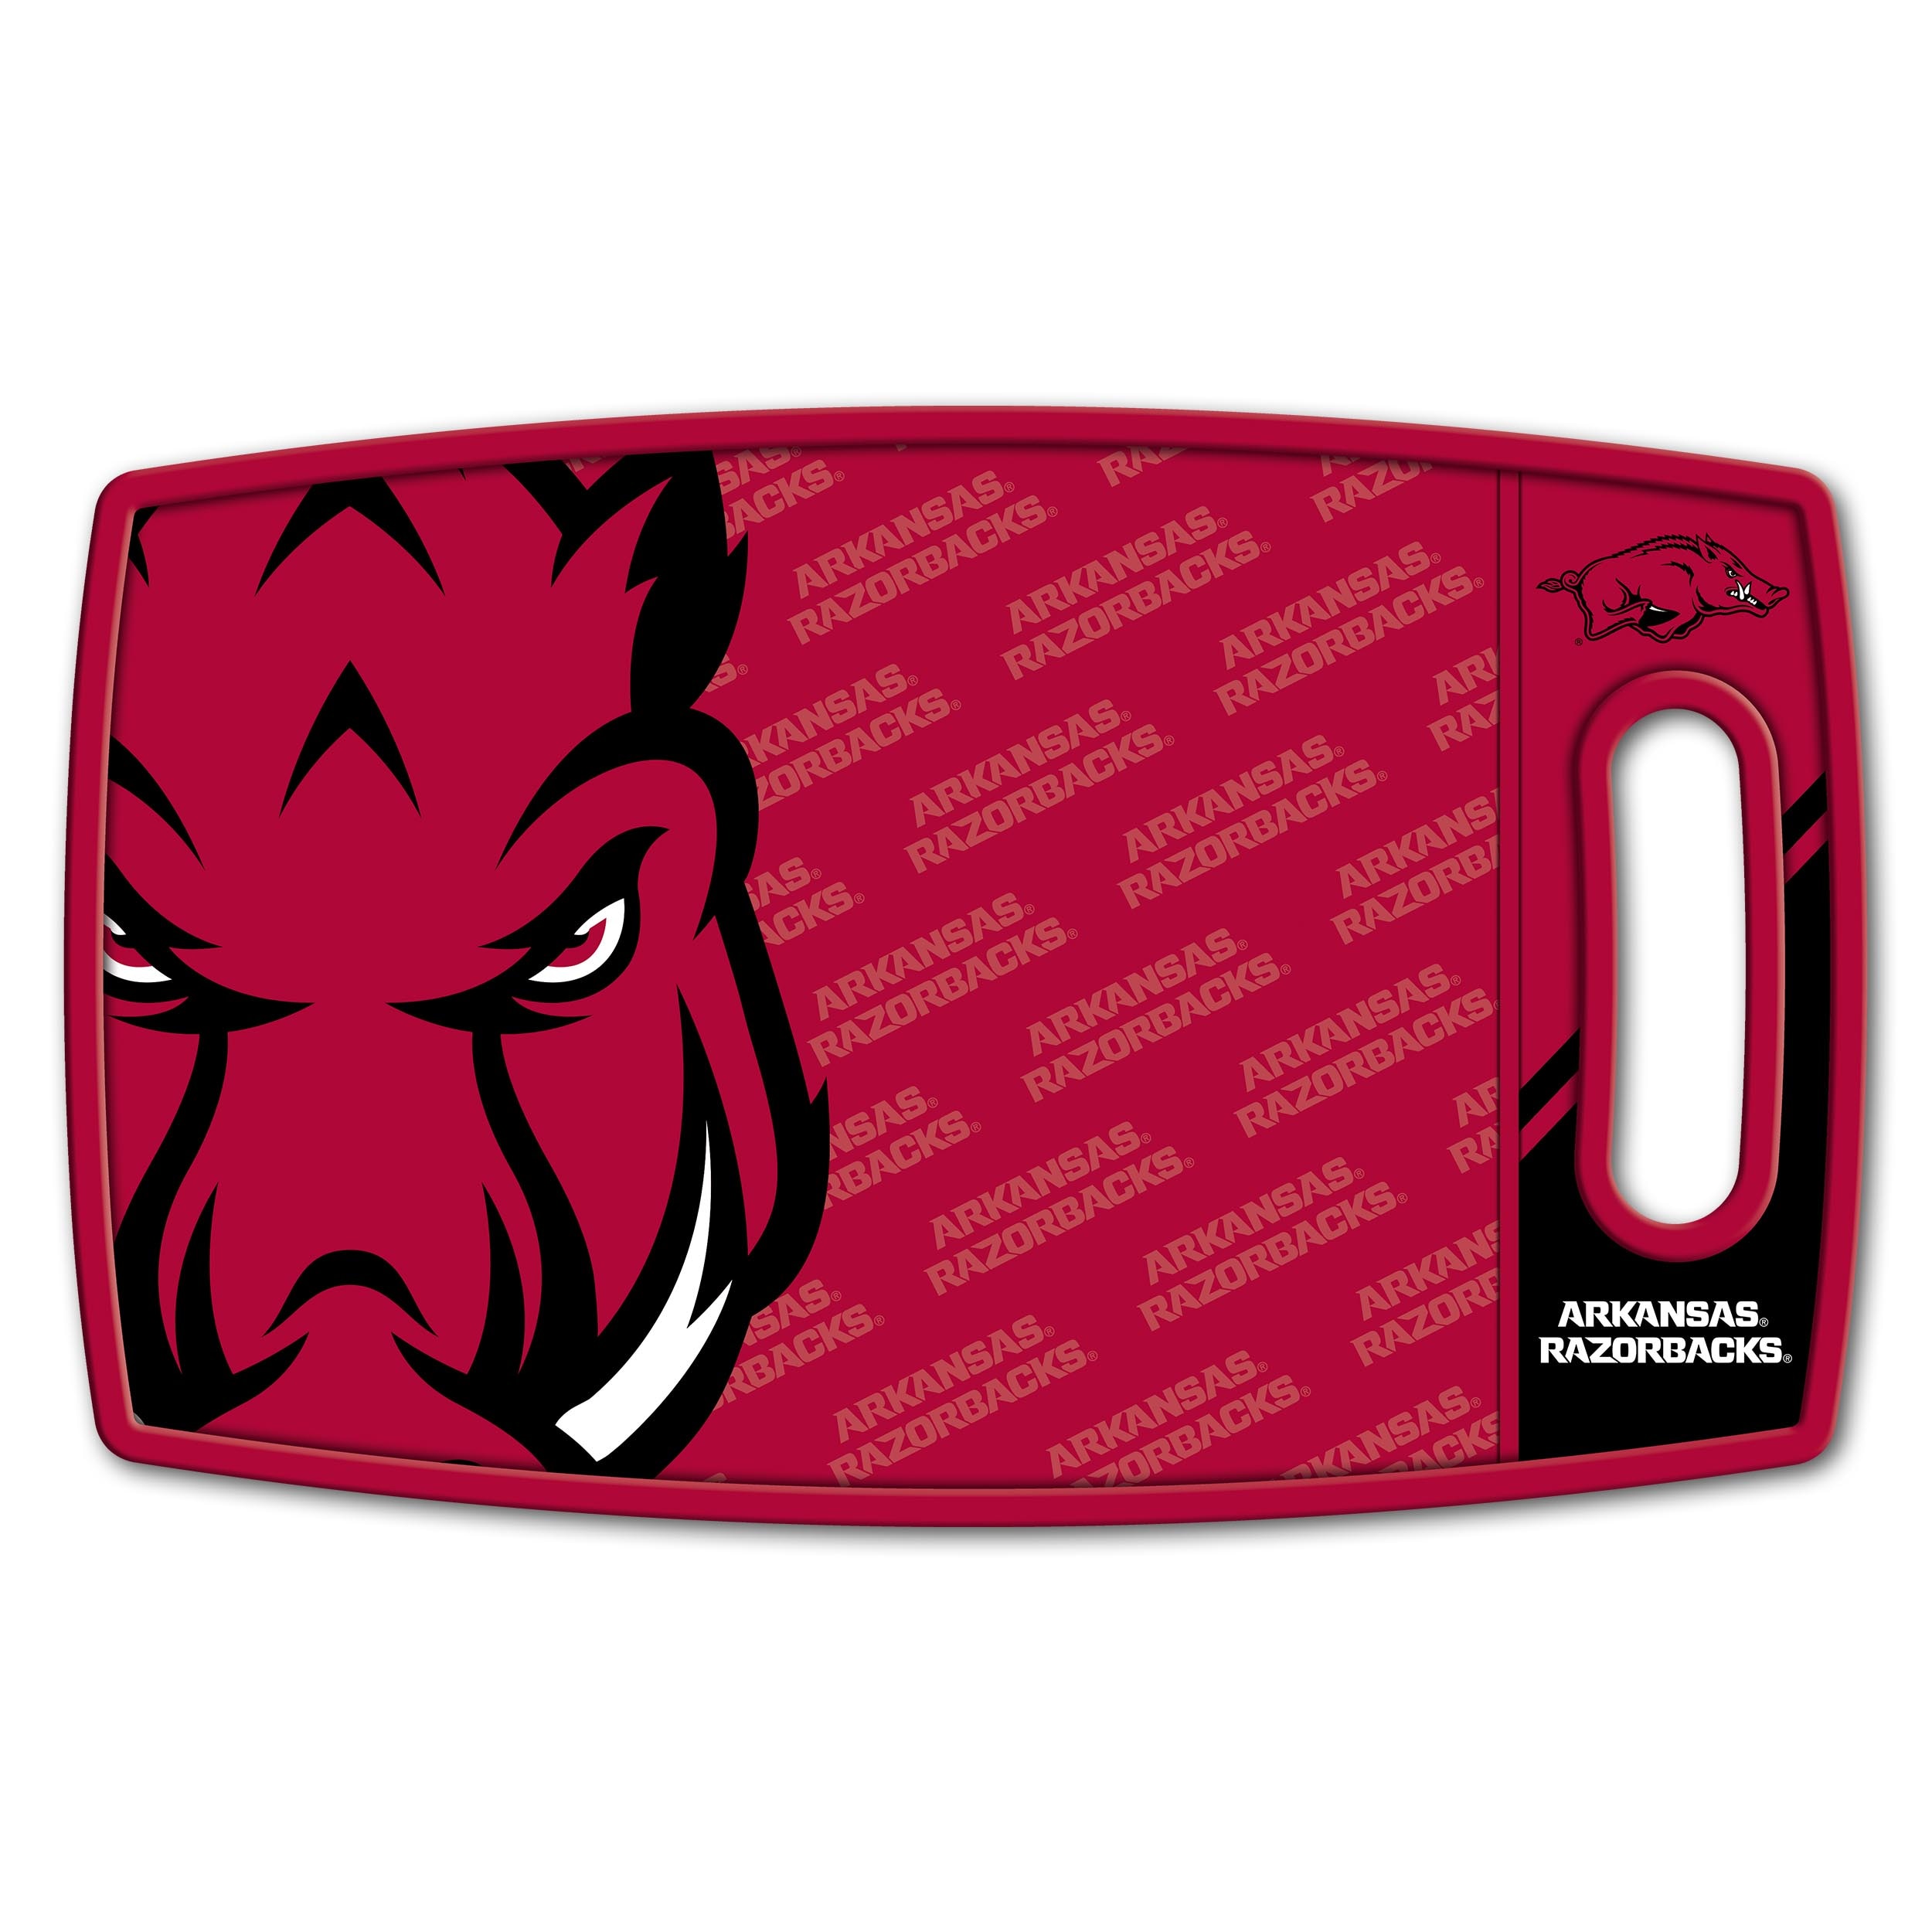 Officially Licensed NCAA Louisville Cardinals 18 Premium Tool bag